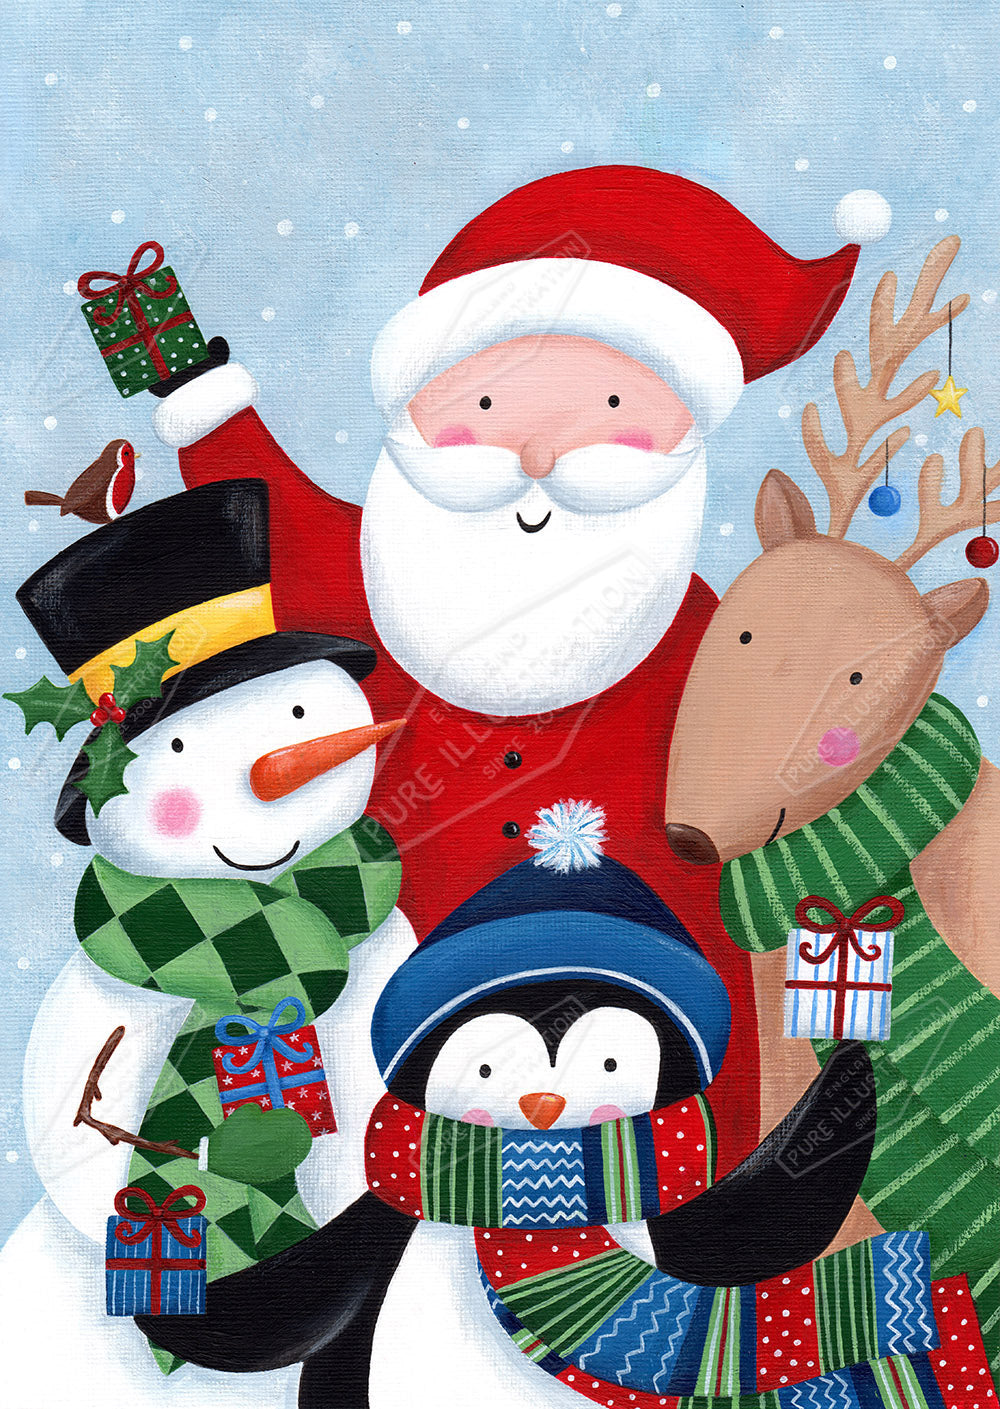 Christmas Characters - Greeting Card Design by Anna Aitken - Pure Art Licensing Agency 00033418AAI